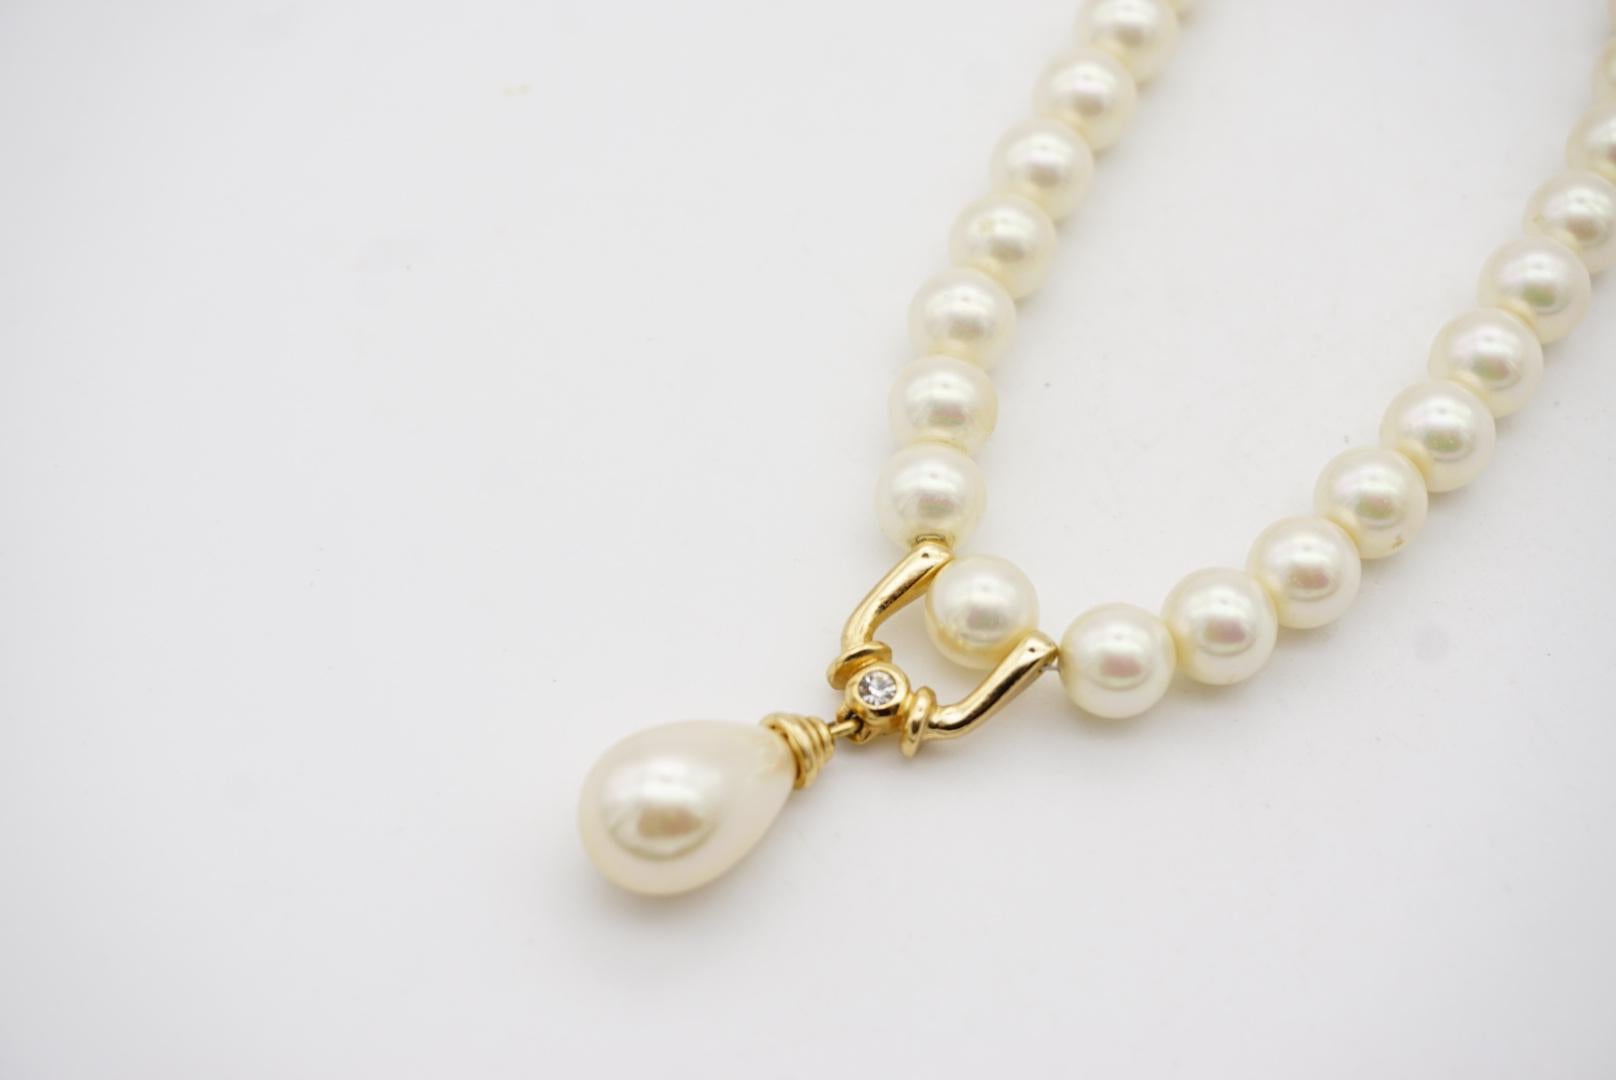 Christian Dior GROSSE 1960s White Pearls Water Drop Pendant Crystals Necklace For Sale 5